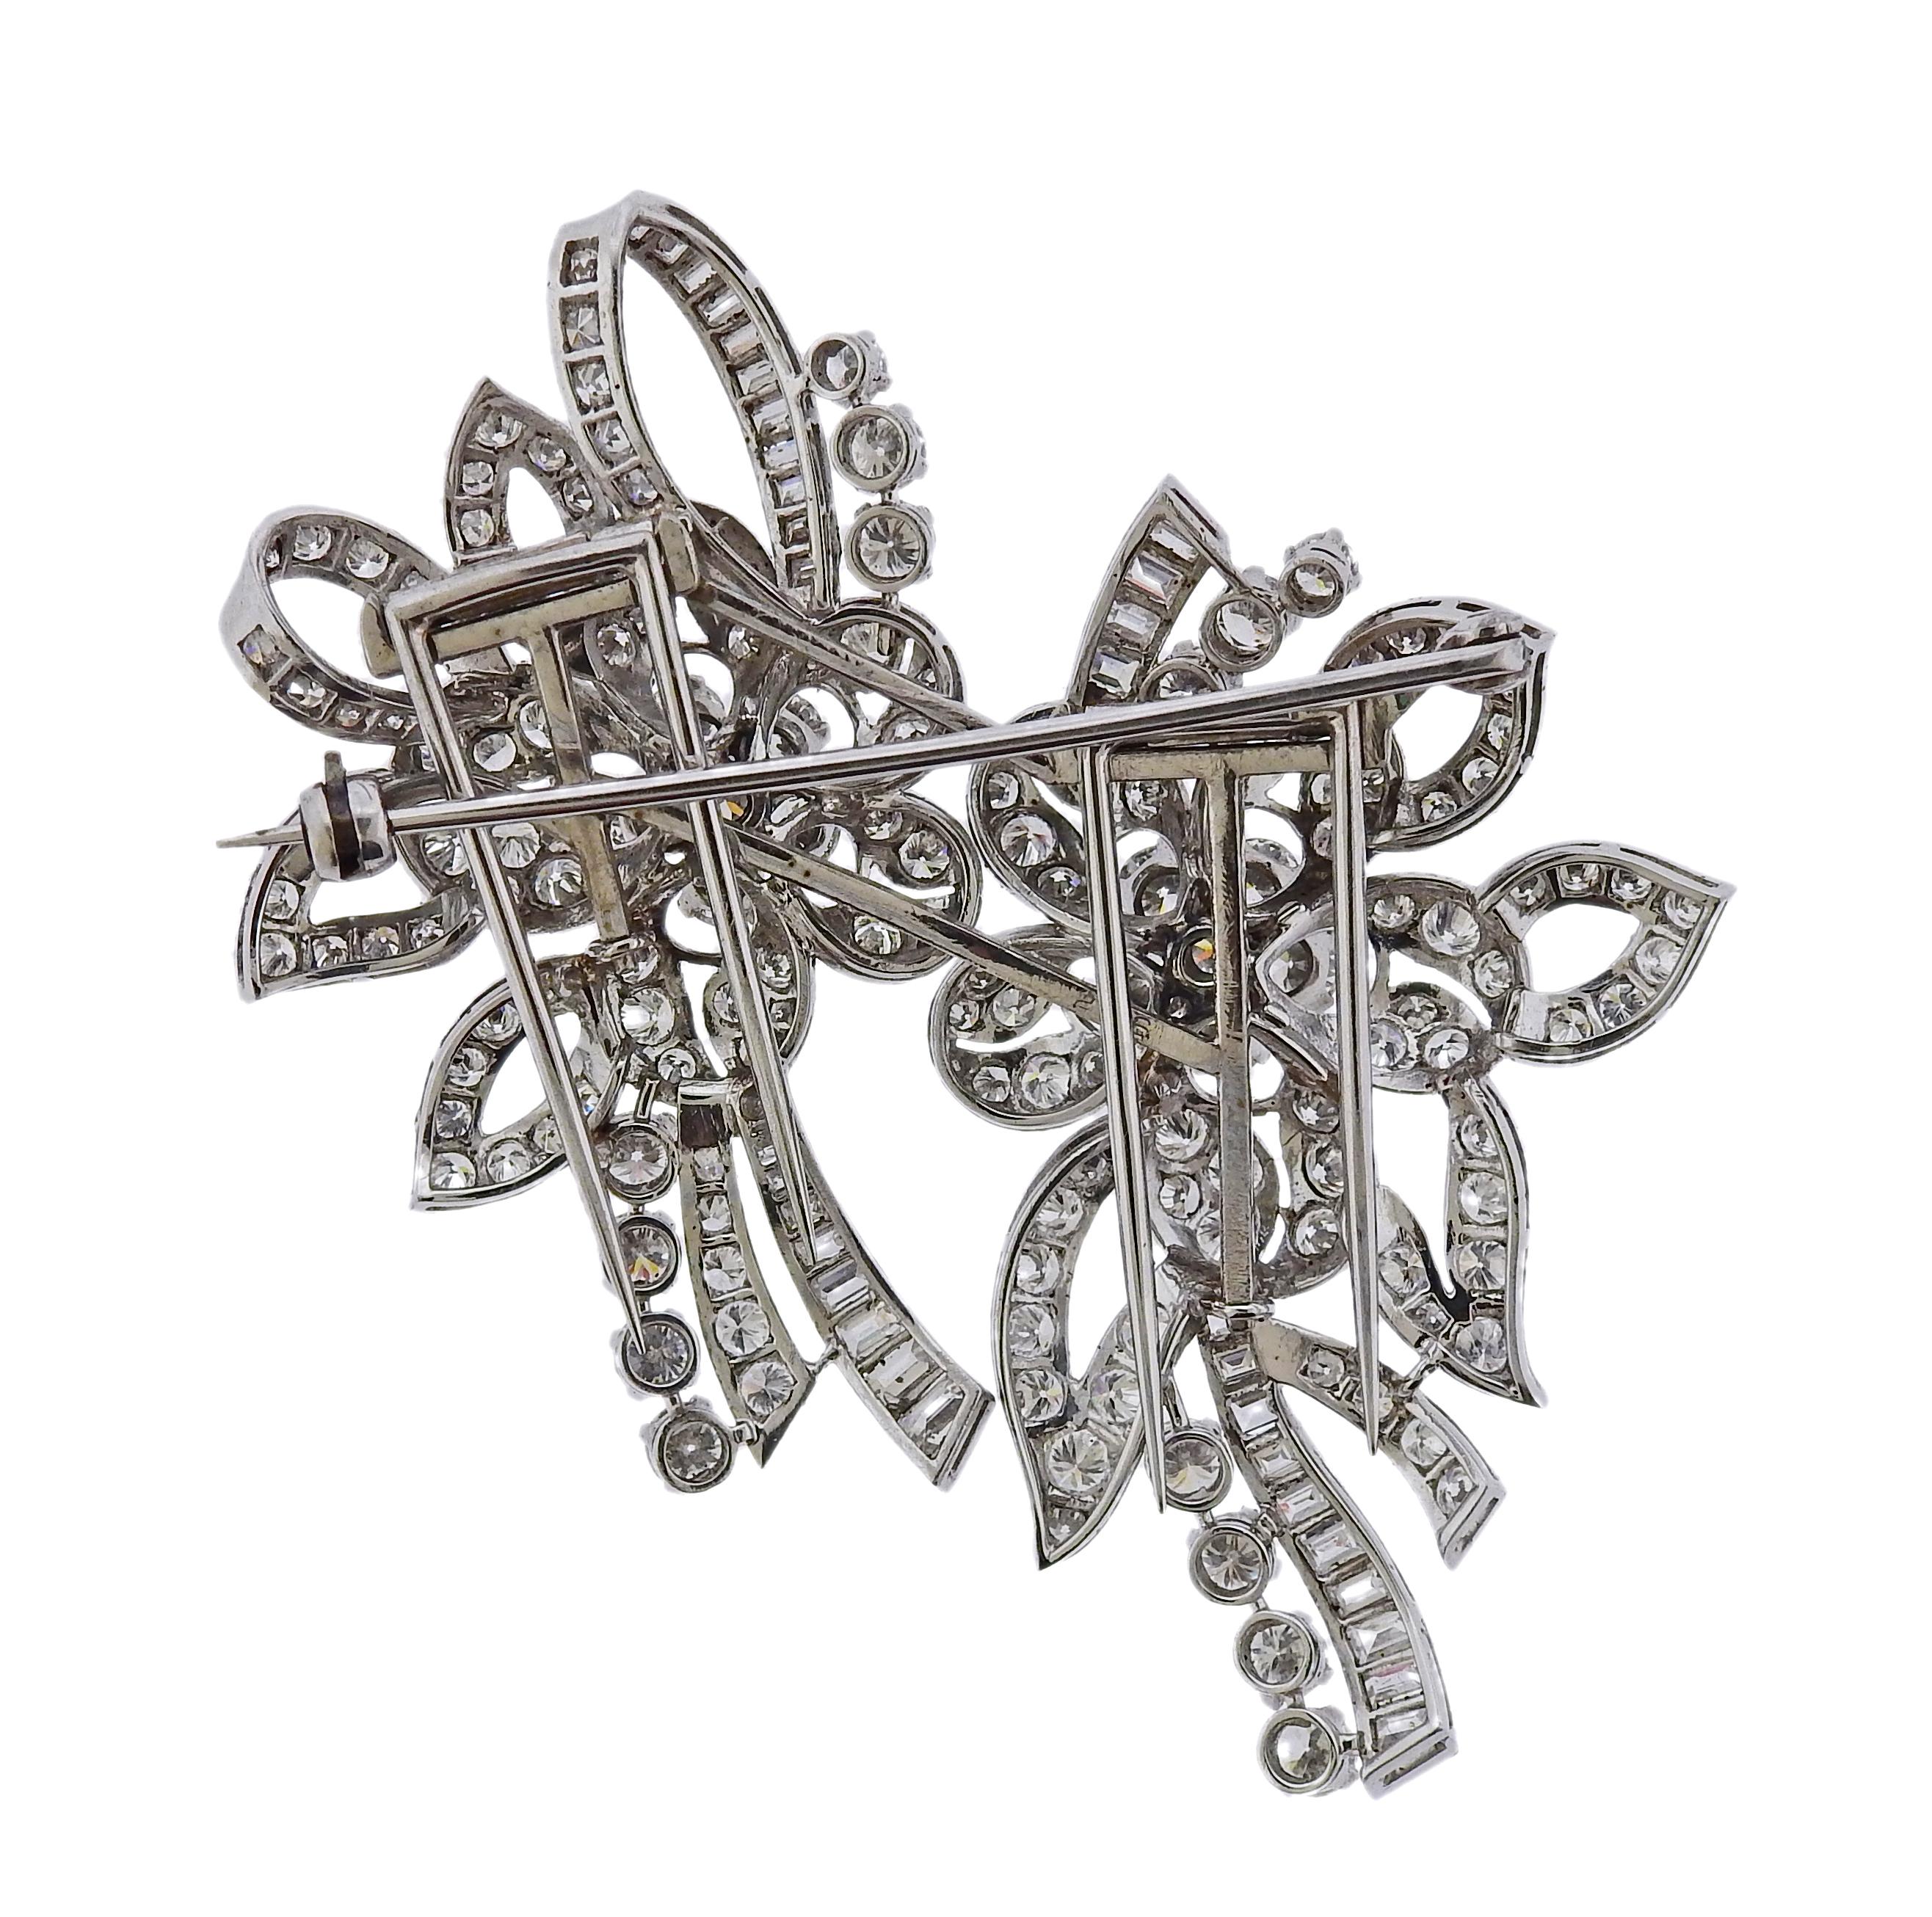 Platinum convertible brooch, turning into two clips, set with a total of approx. 13 carats in VS/GH diamonds. Brooch is 63mm x 52mm, clips measure 52mm x 31mm each. Weight is 29.1 grams. Marked:  2116.